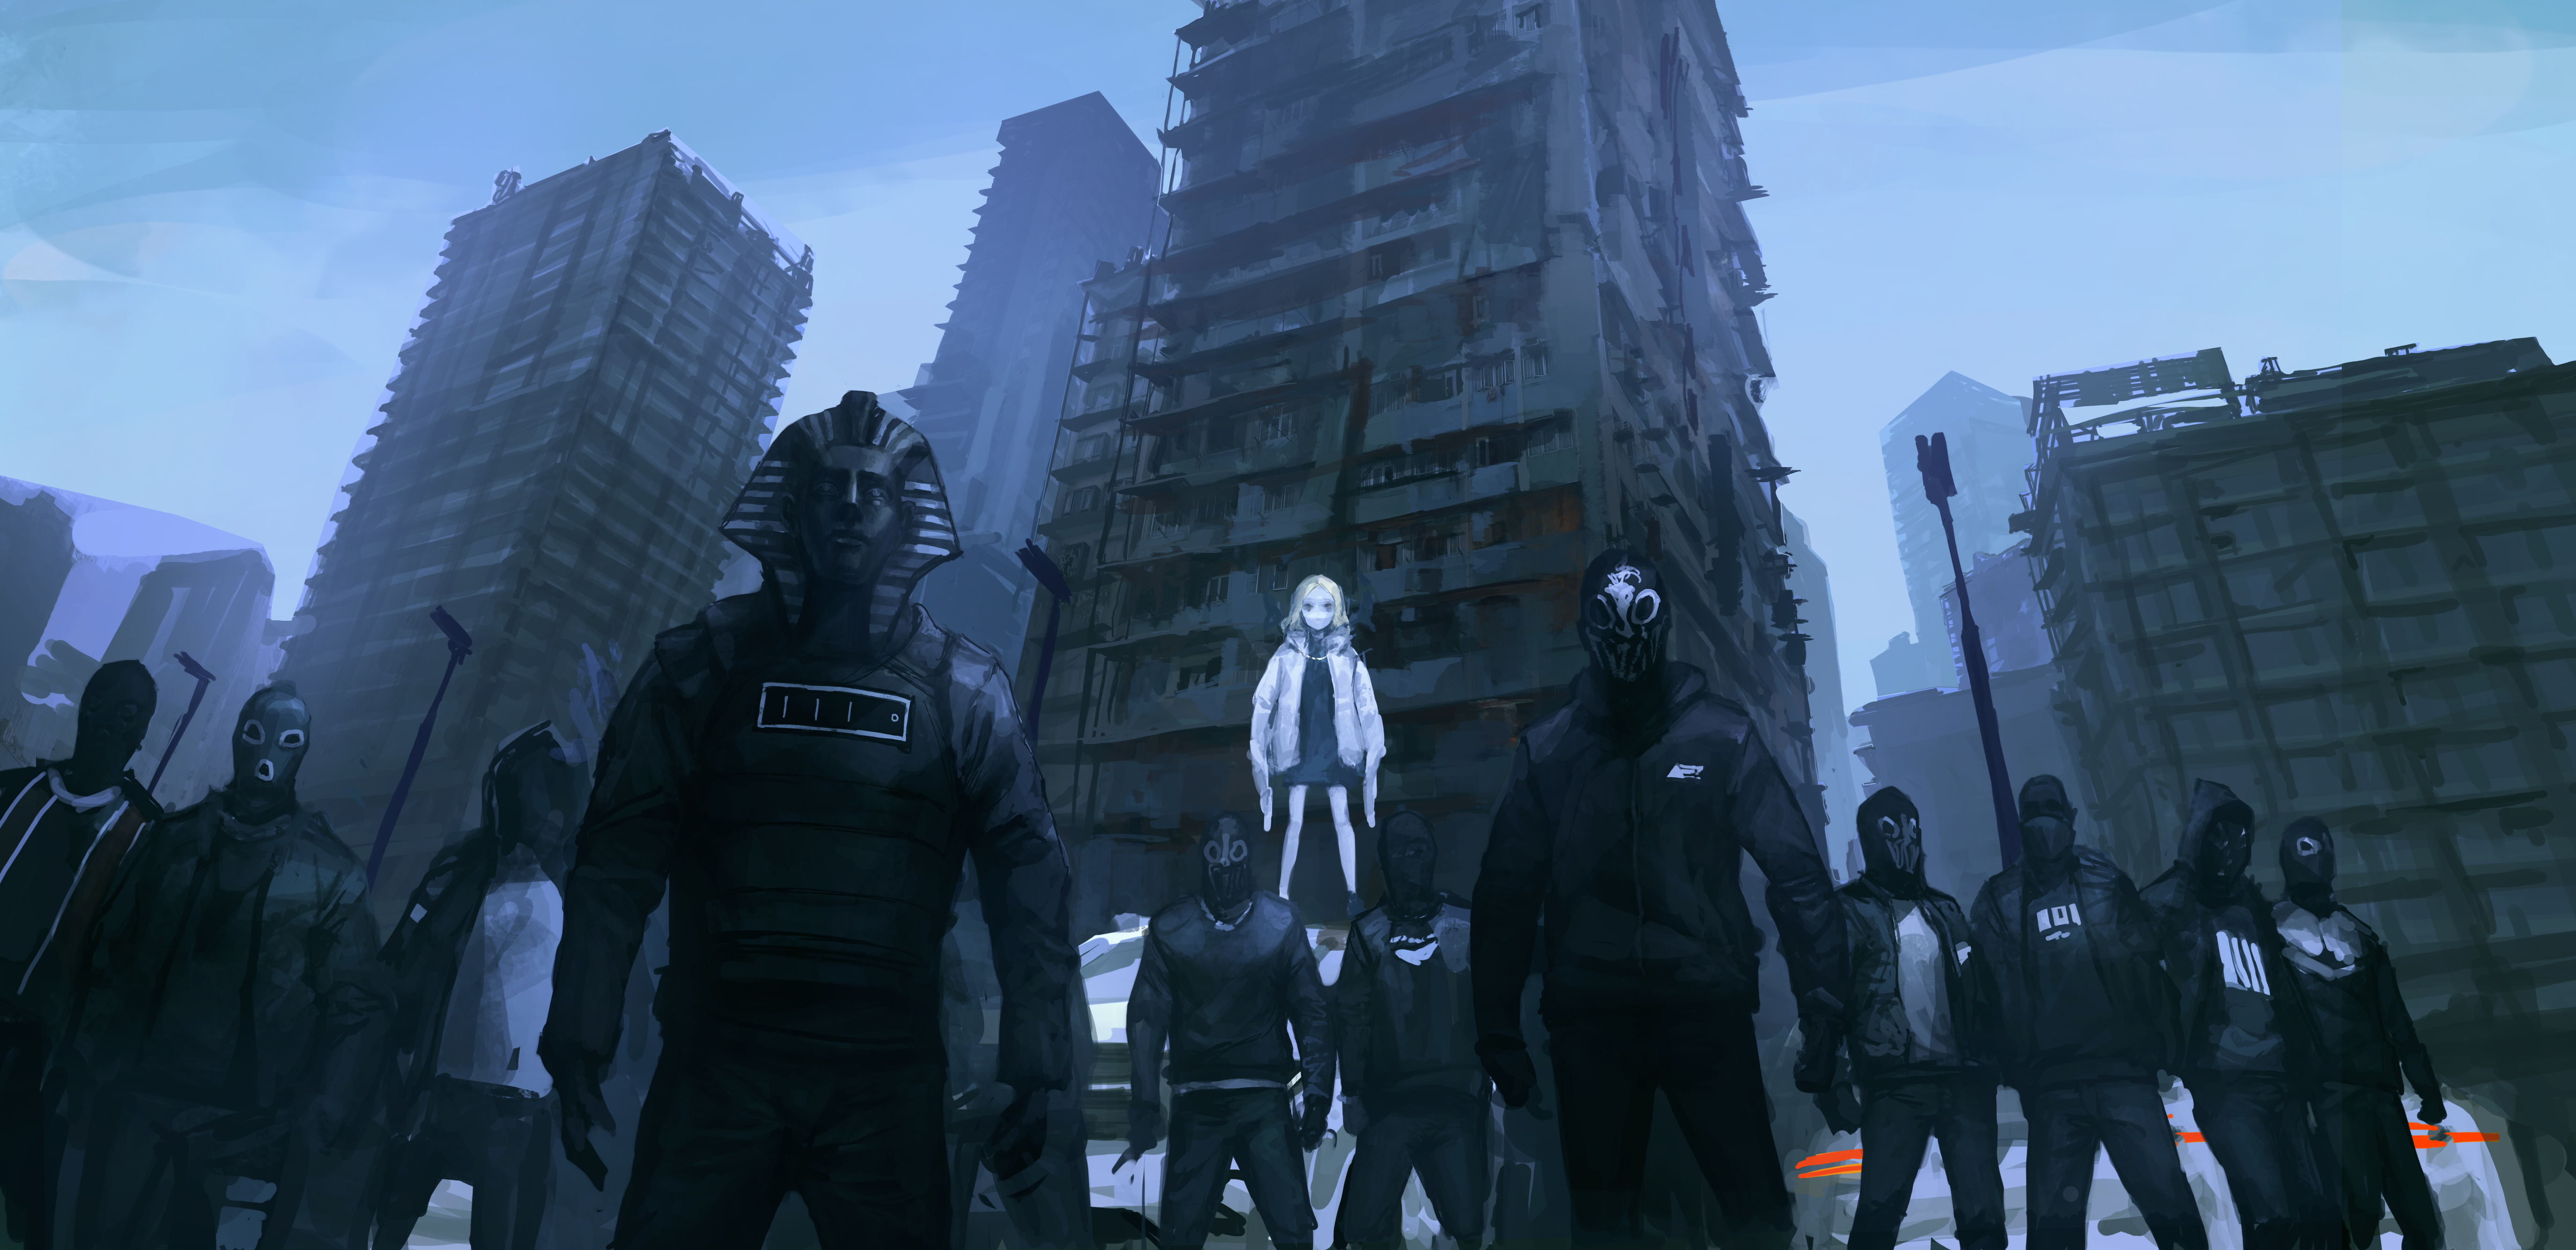 Original Characters Anime Girls Cityscape THE LM7 Low Angle 5500x2668